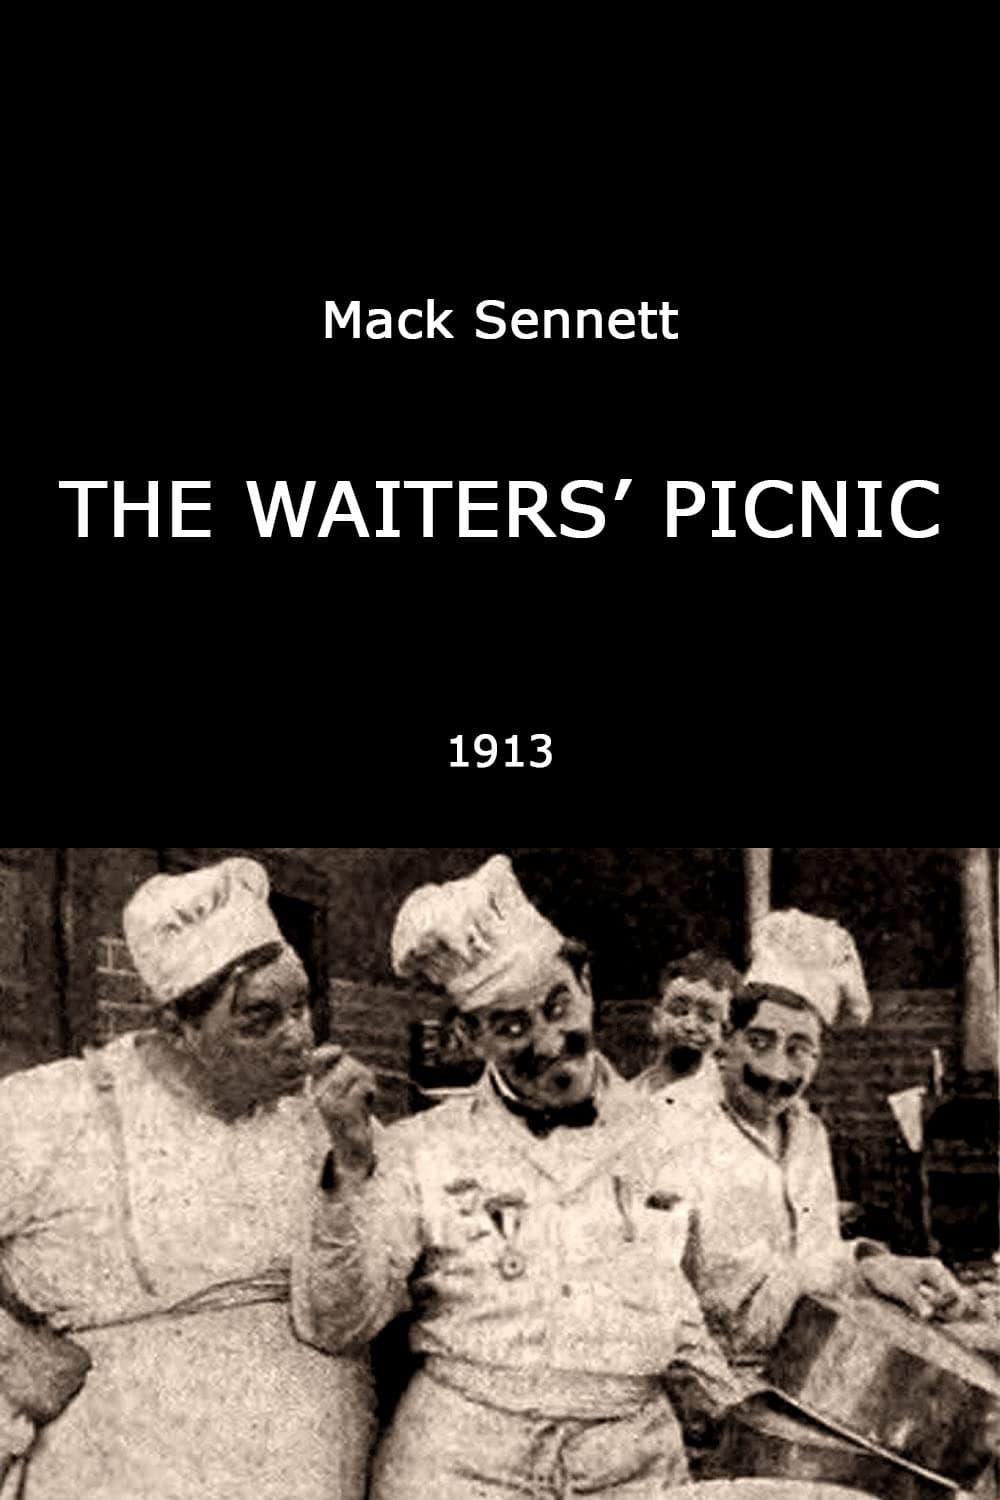 The Waiters' Picnic poster